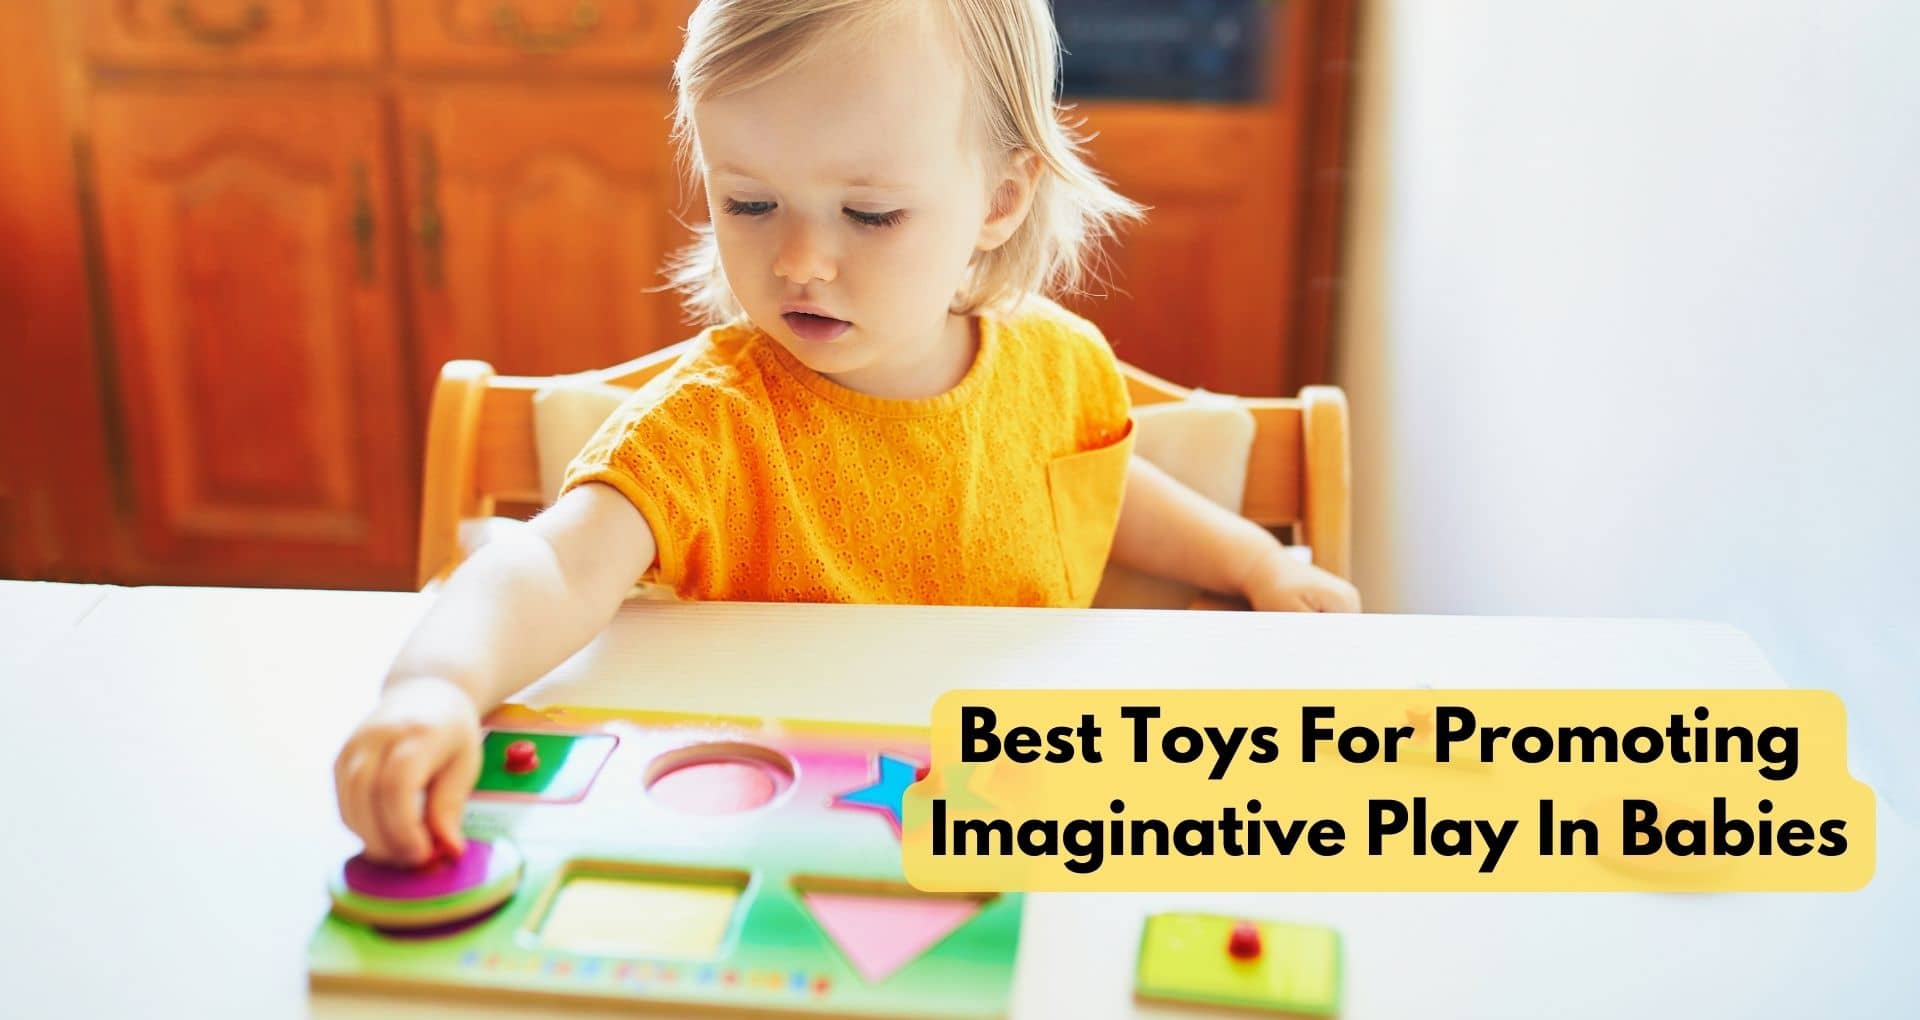 Best Toys For Promoting Imaginative Play In Babies